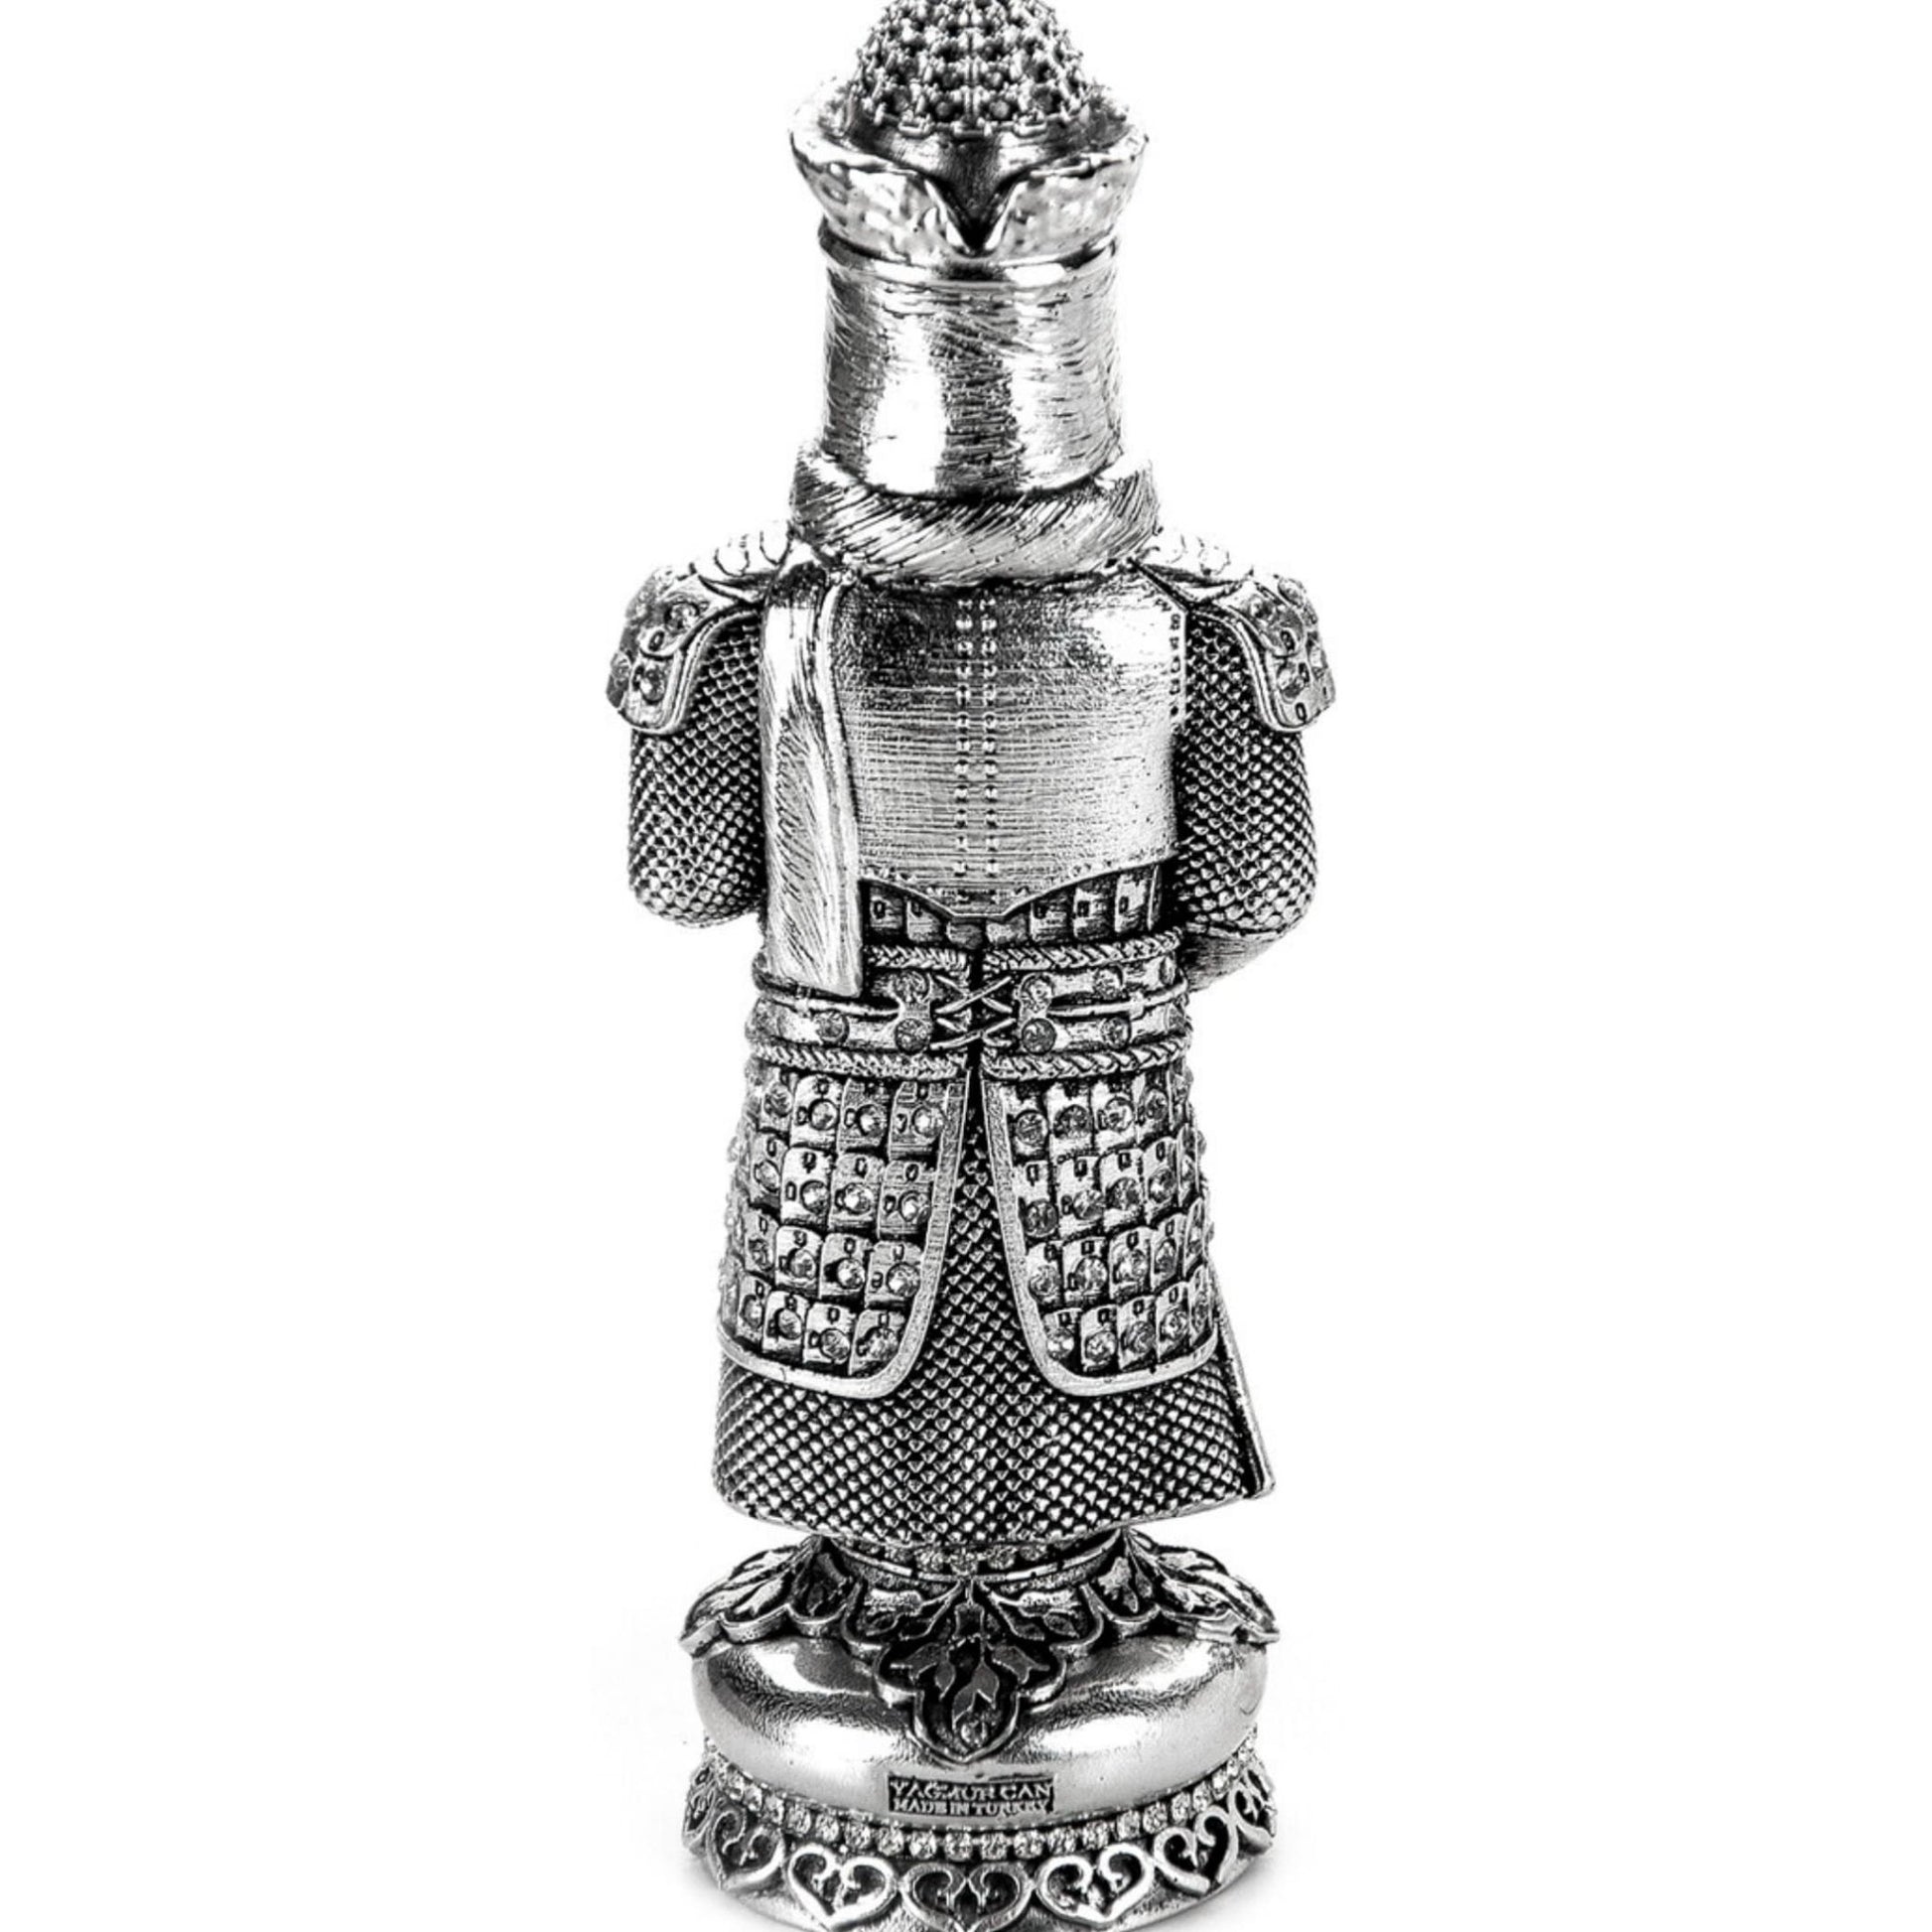 Handmade Ertugrul Ghazi Armor Statue Gift Silver Color/Zinc and Copper Alloy Handcrafted Metal Statue/220mm Heavy Material 700gr Dirilis Toy - Turkish TV Series